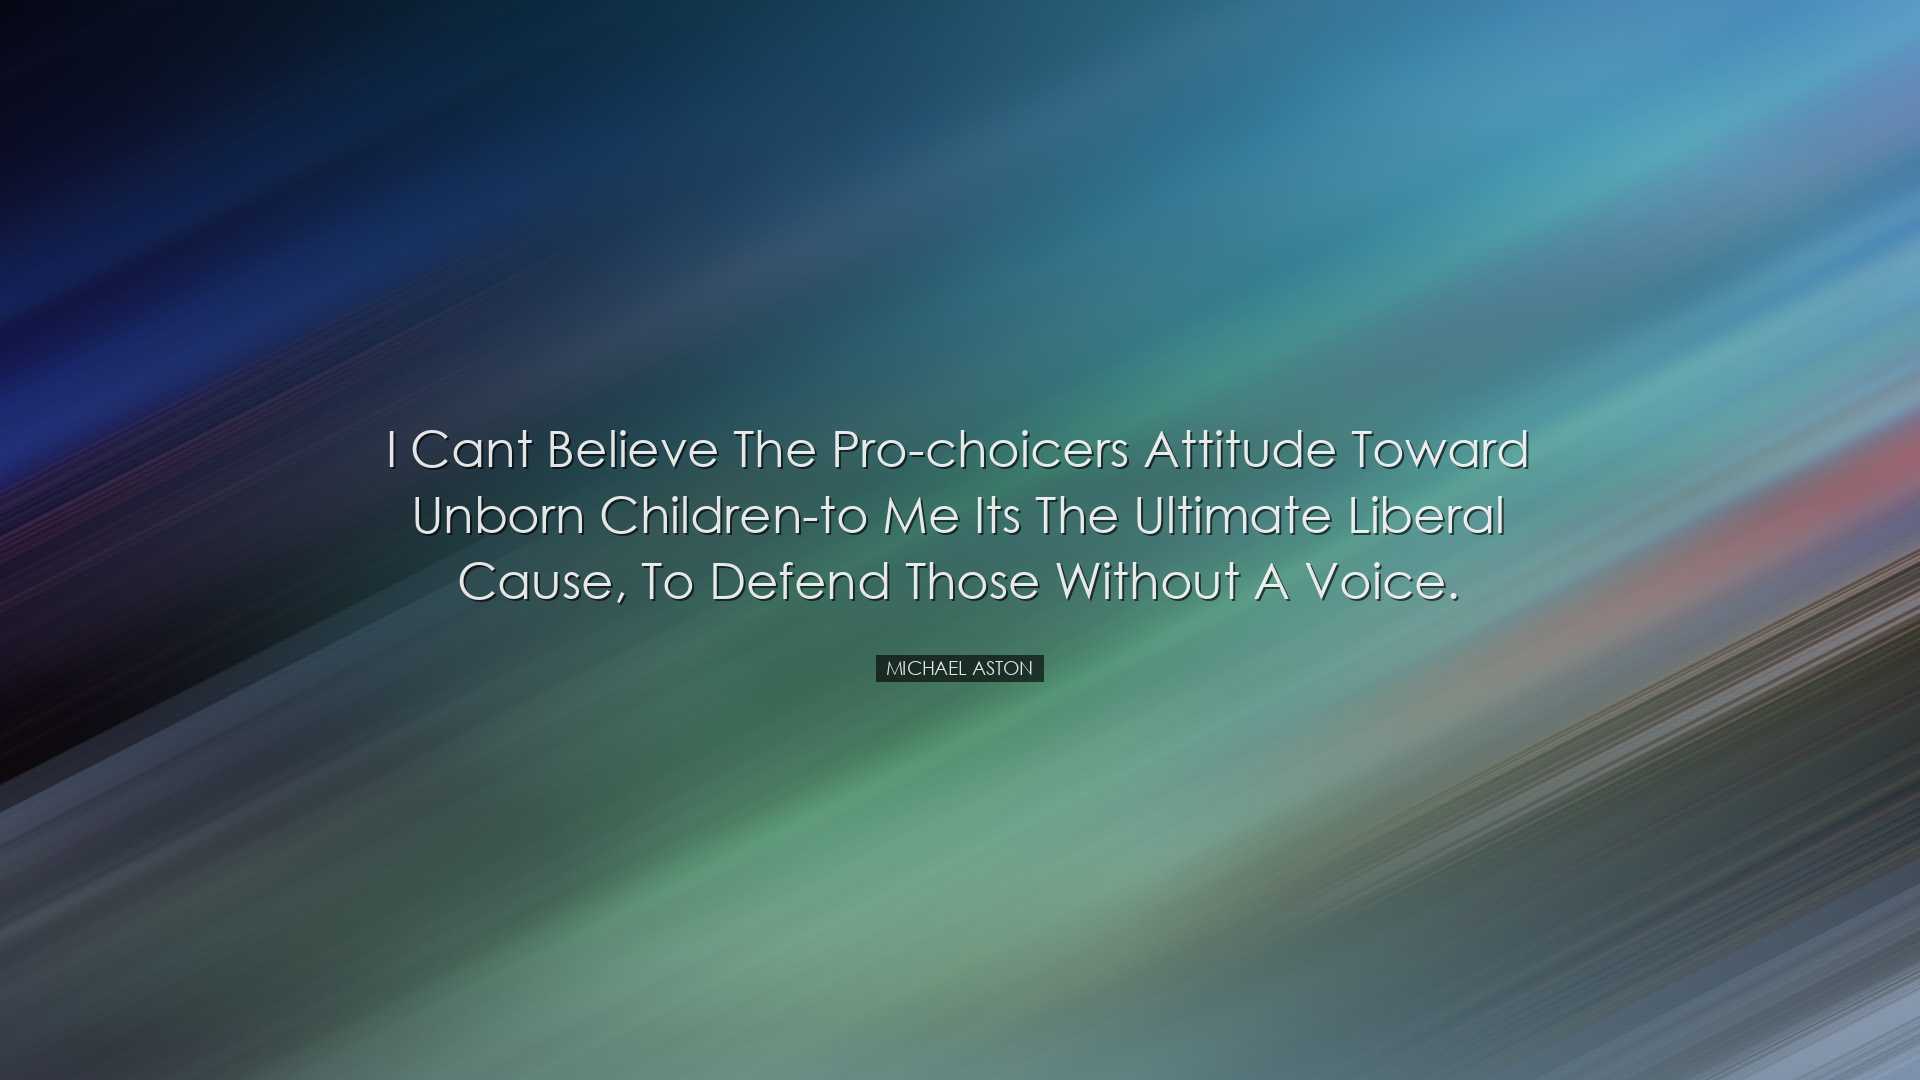 I cant believe the pro-choicers attitude toward unborn children-to